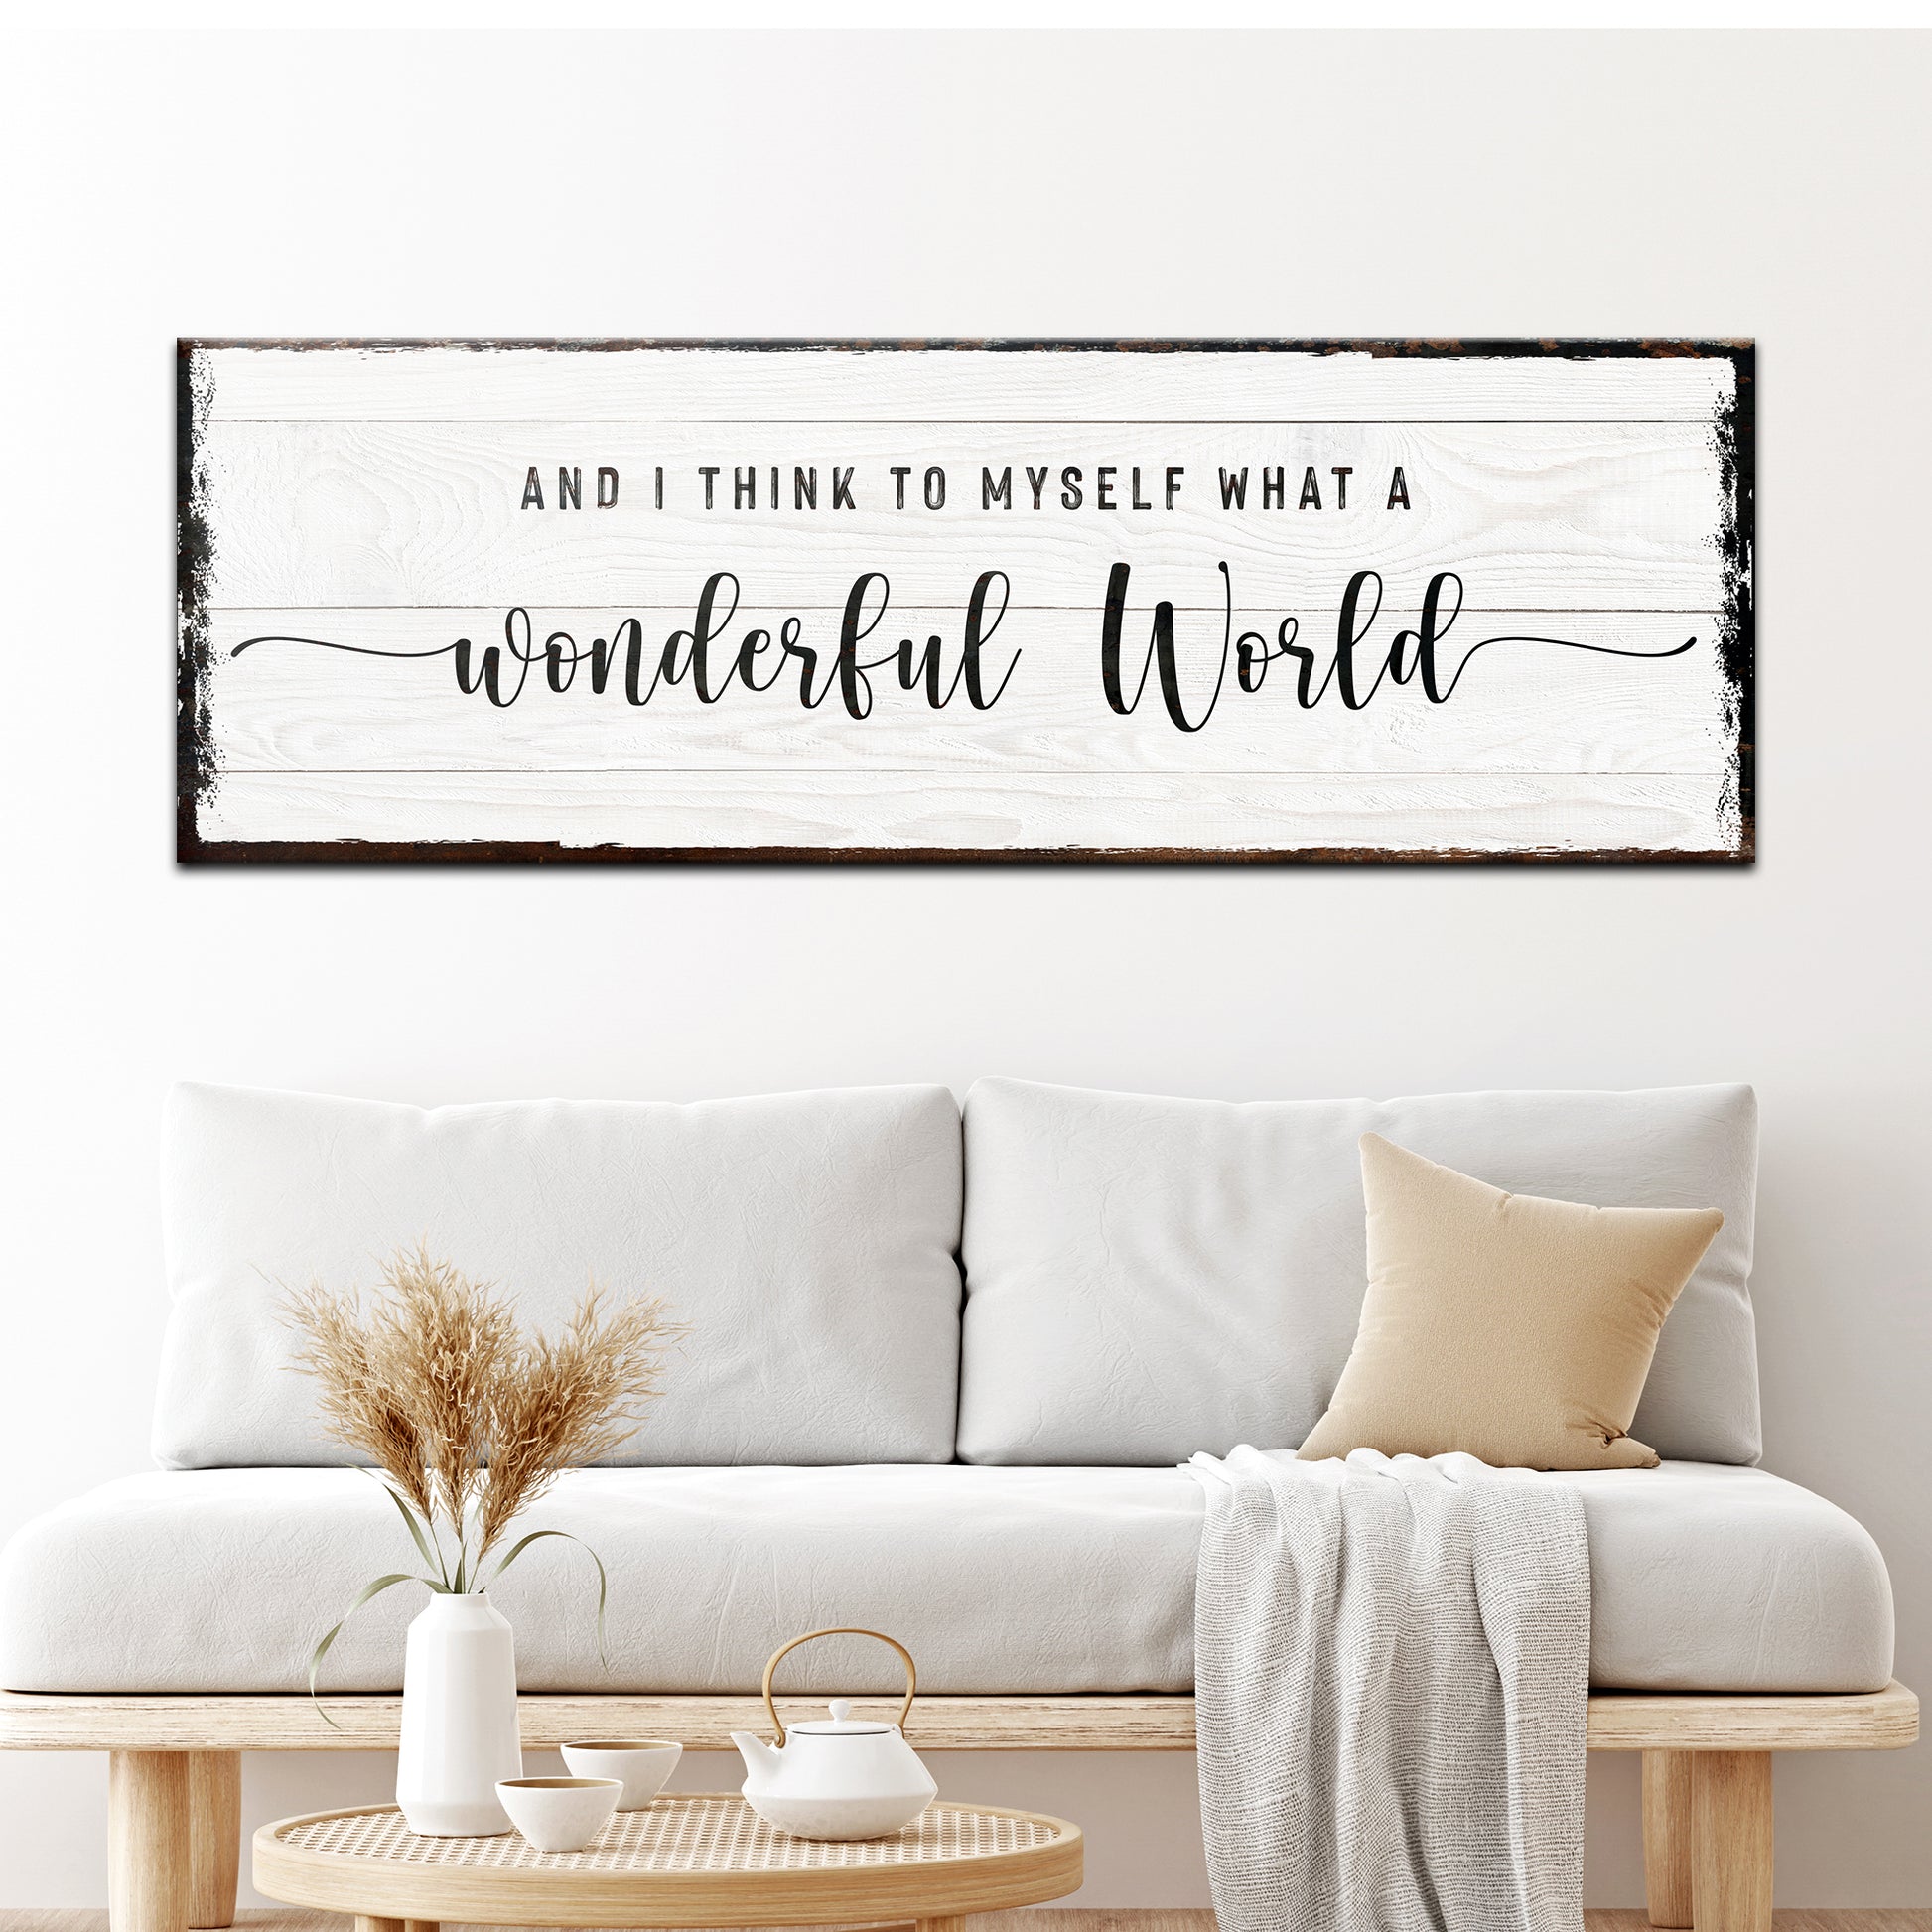 What A Wonderful World Sign - Image by Tailored Canvases